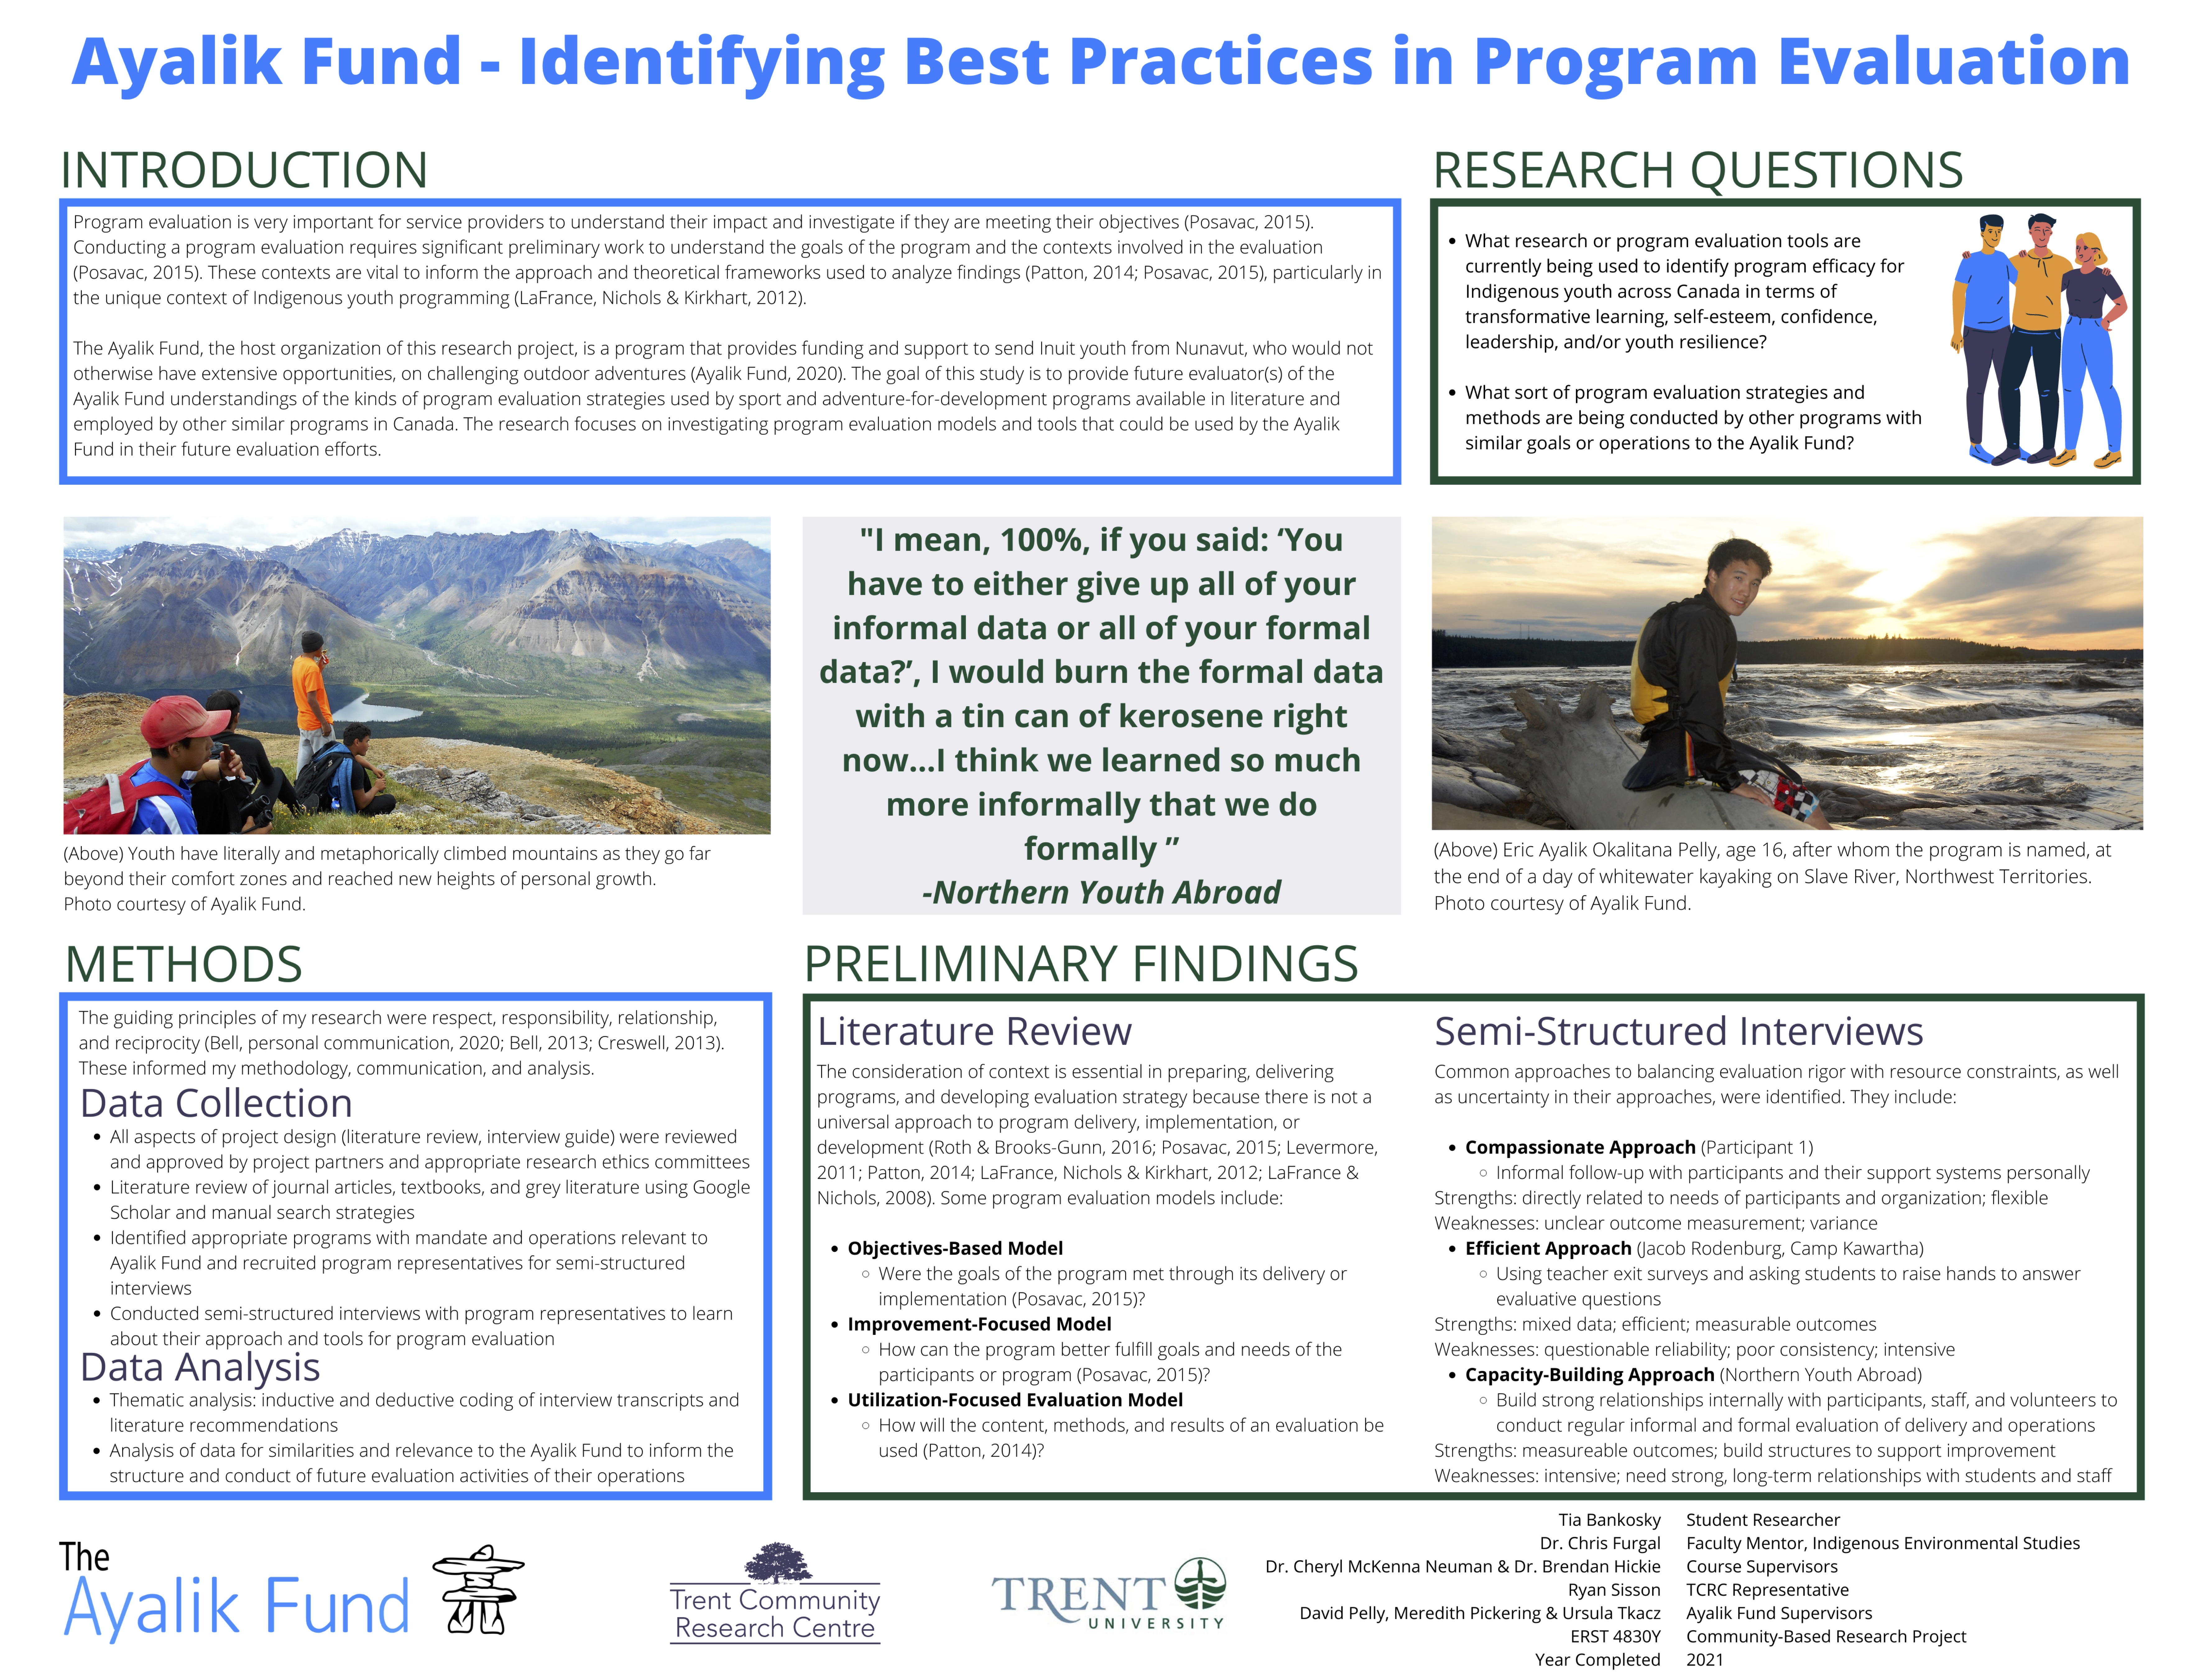 Research Poster for Ayalik Fund - Identifying Best Practices in Program Evaluation